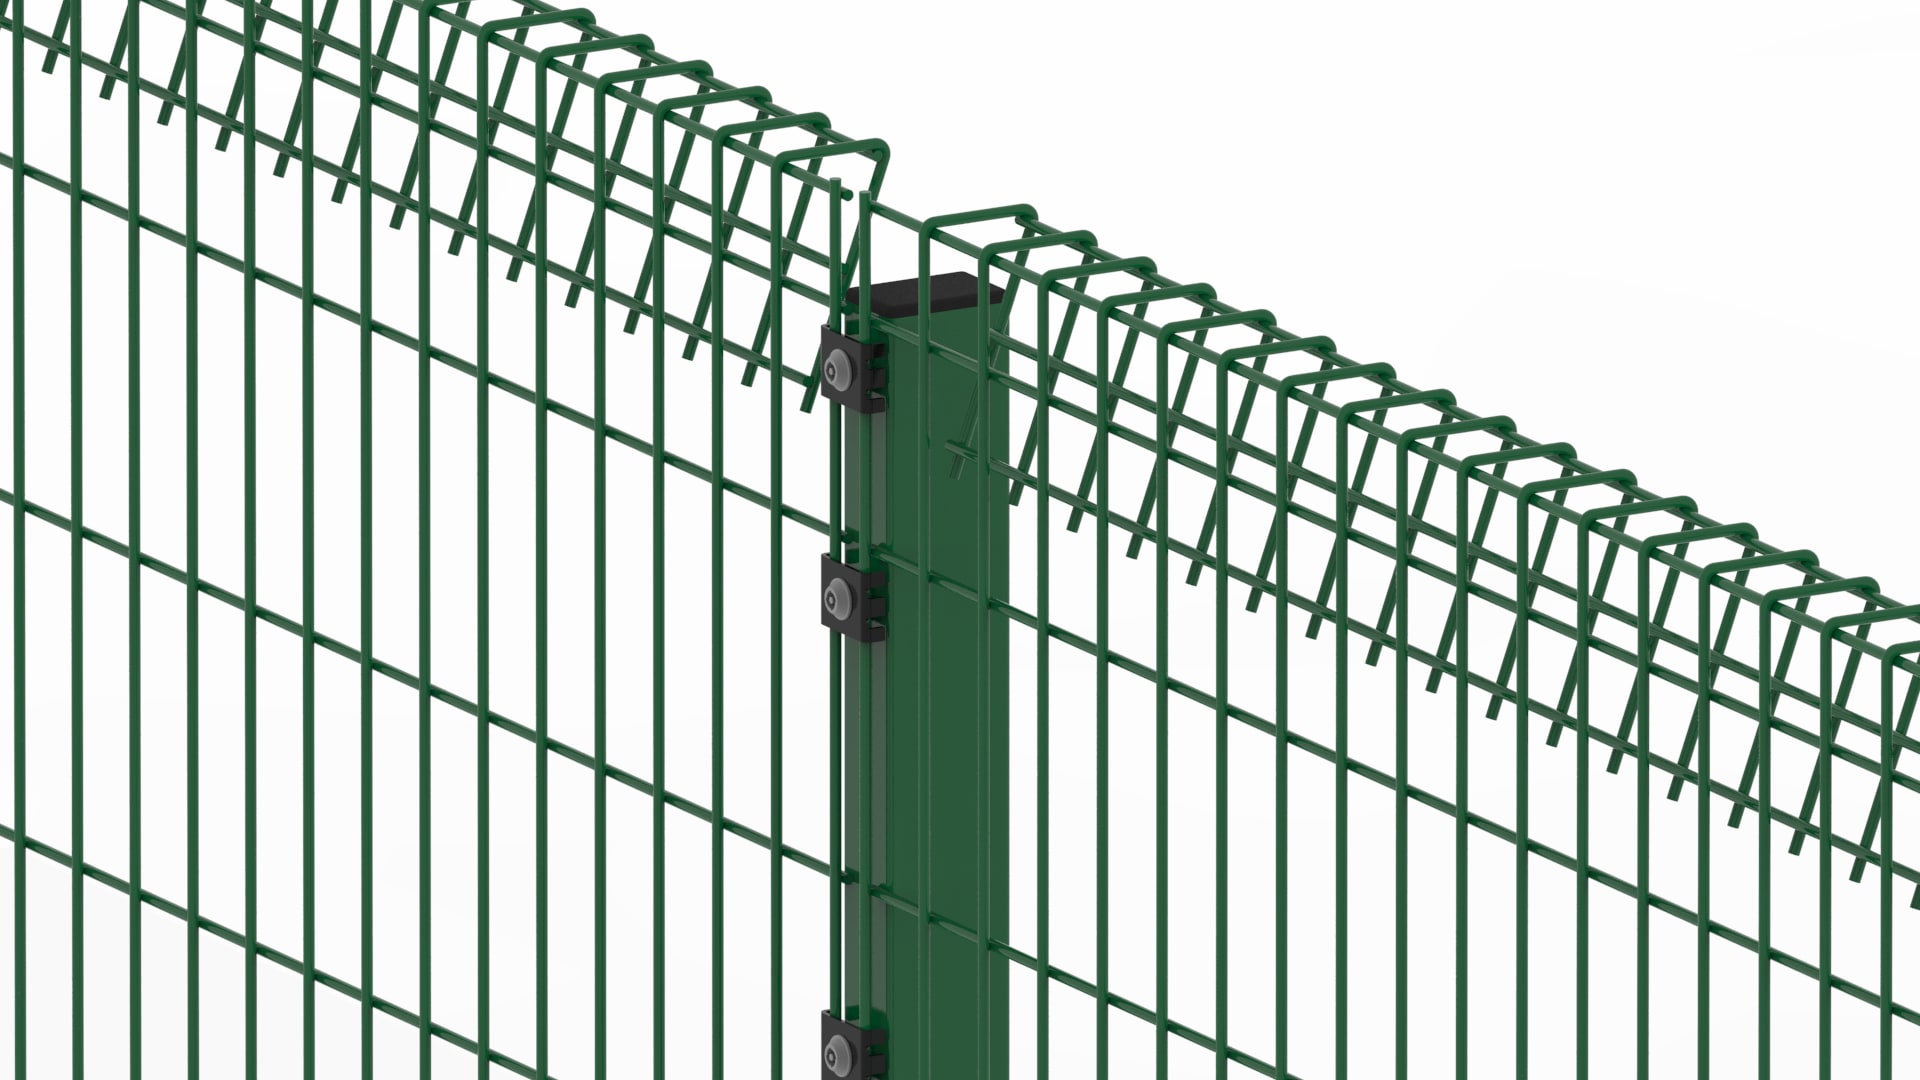 https://first-fence-ltd.mo.cloudinary.net/products/5f16f3c18b49590d02deace7/images/product_image.png